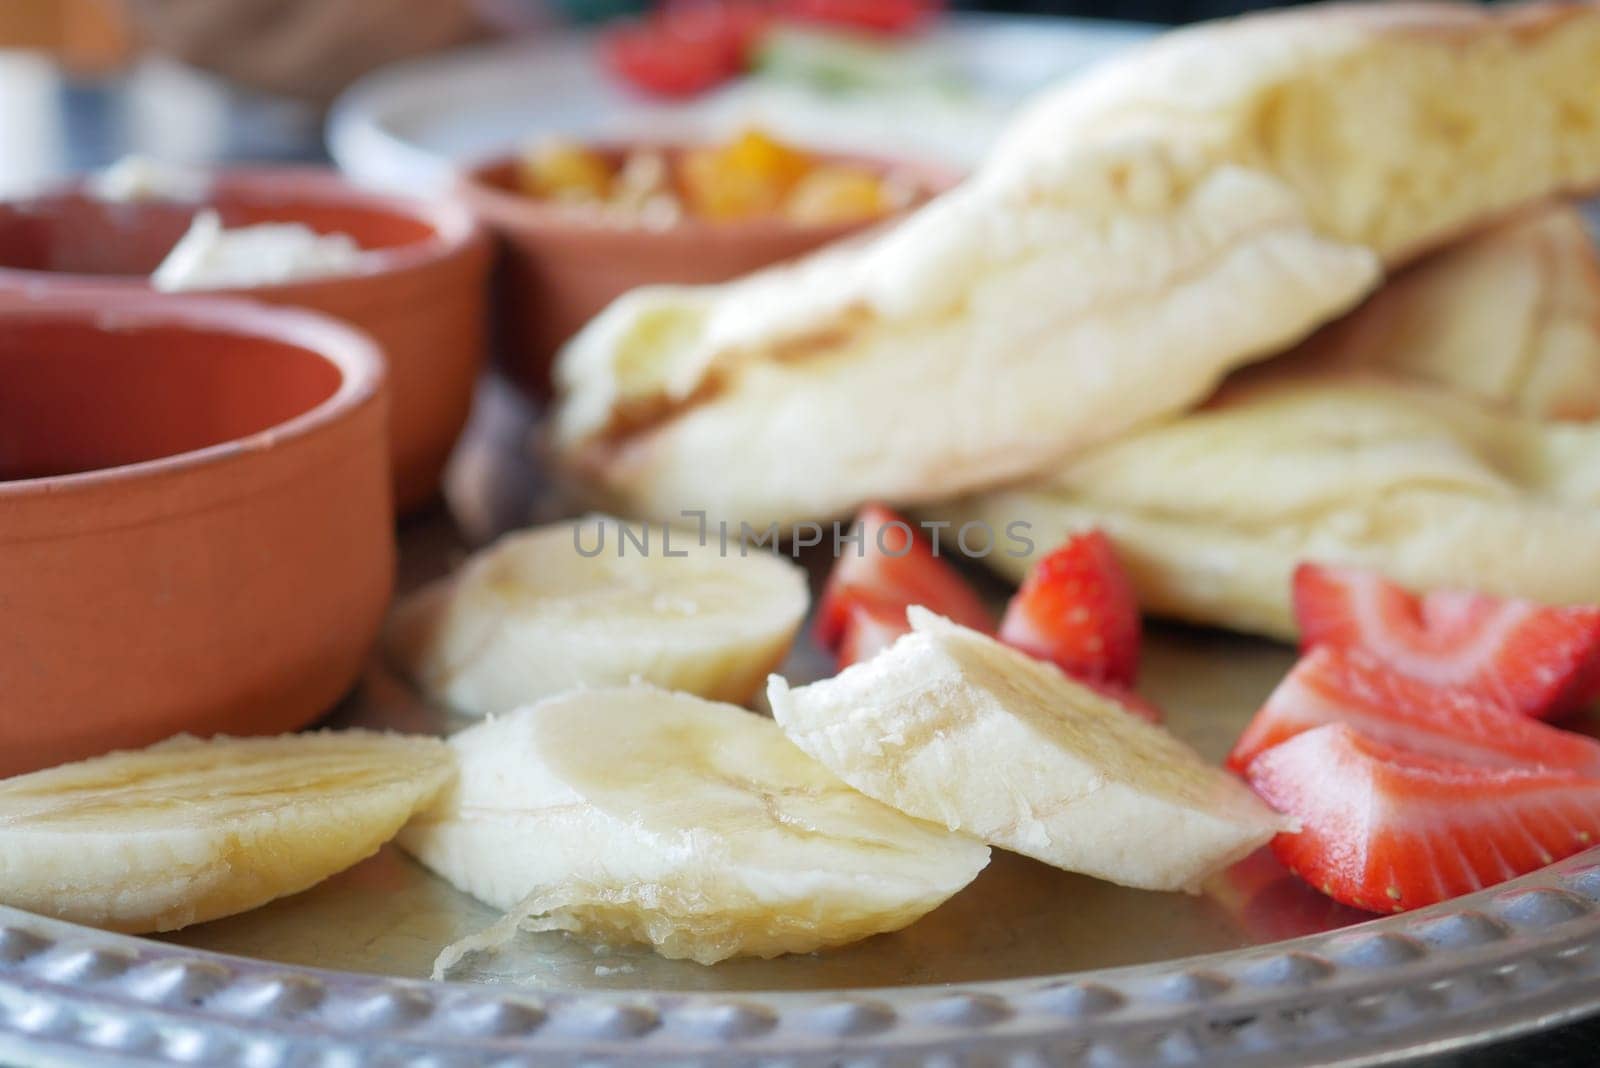 close up of slice of banana, strawberry and bread on table .